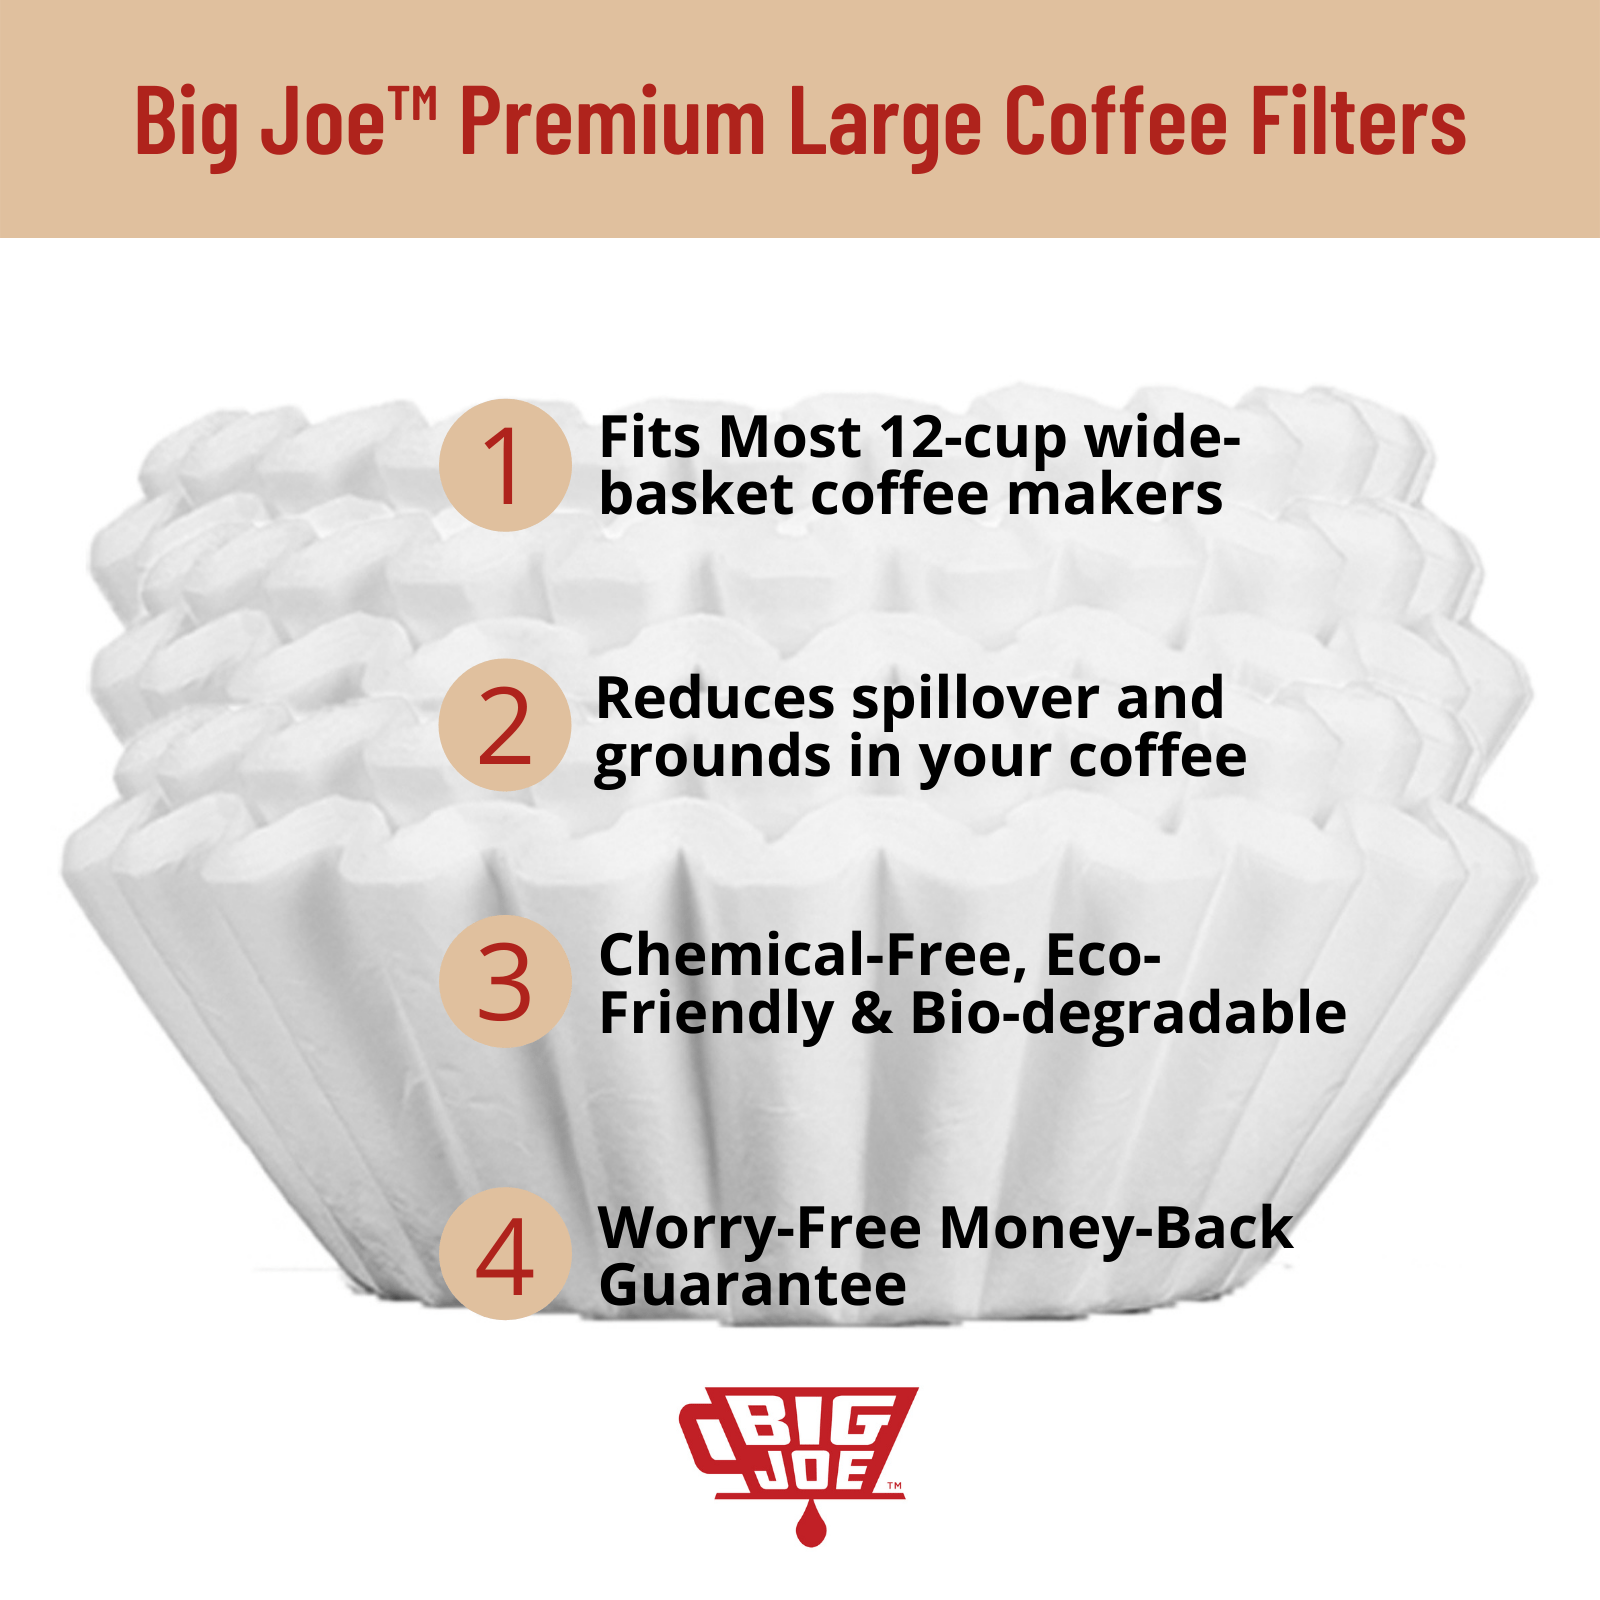 Tupkee Extra Large Coffee Filters - 1.5 to 3 Gallon (13 x 5) Coffee & Tea Filter (500 Count) - Tall Walled to Prevent Ground Overflow - Chlorine